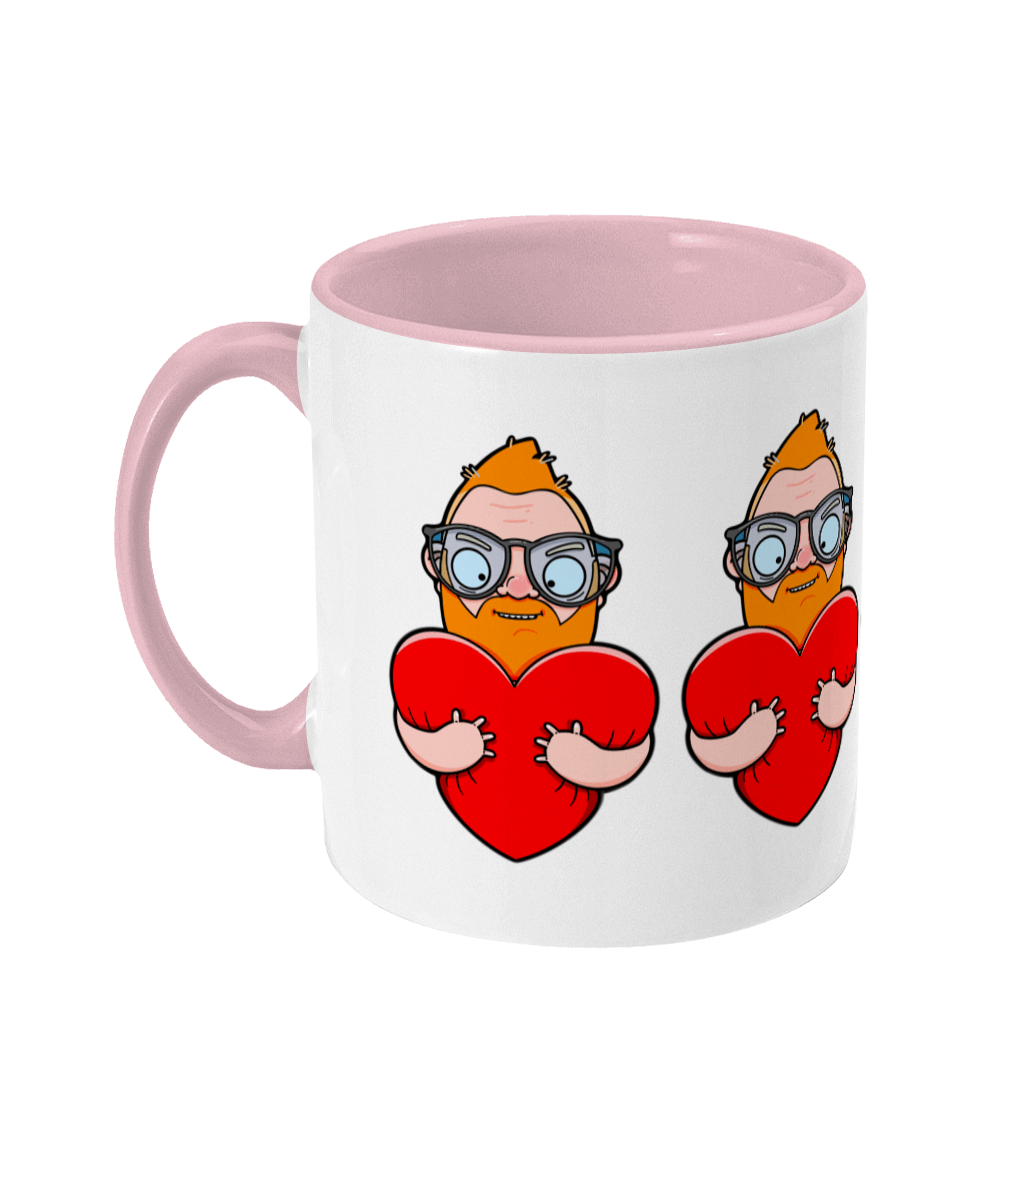 Fun design showcasing a gay ginger daddy embracing a vibrant red heart and giving it a hug.